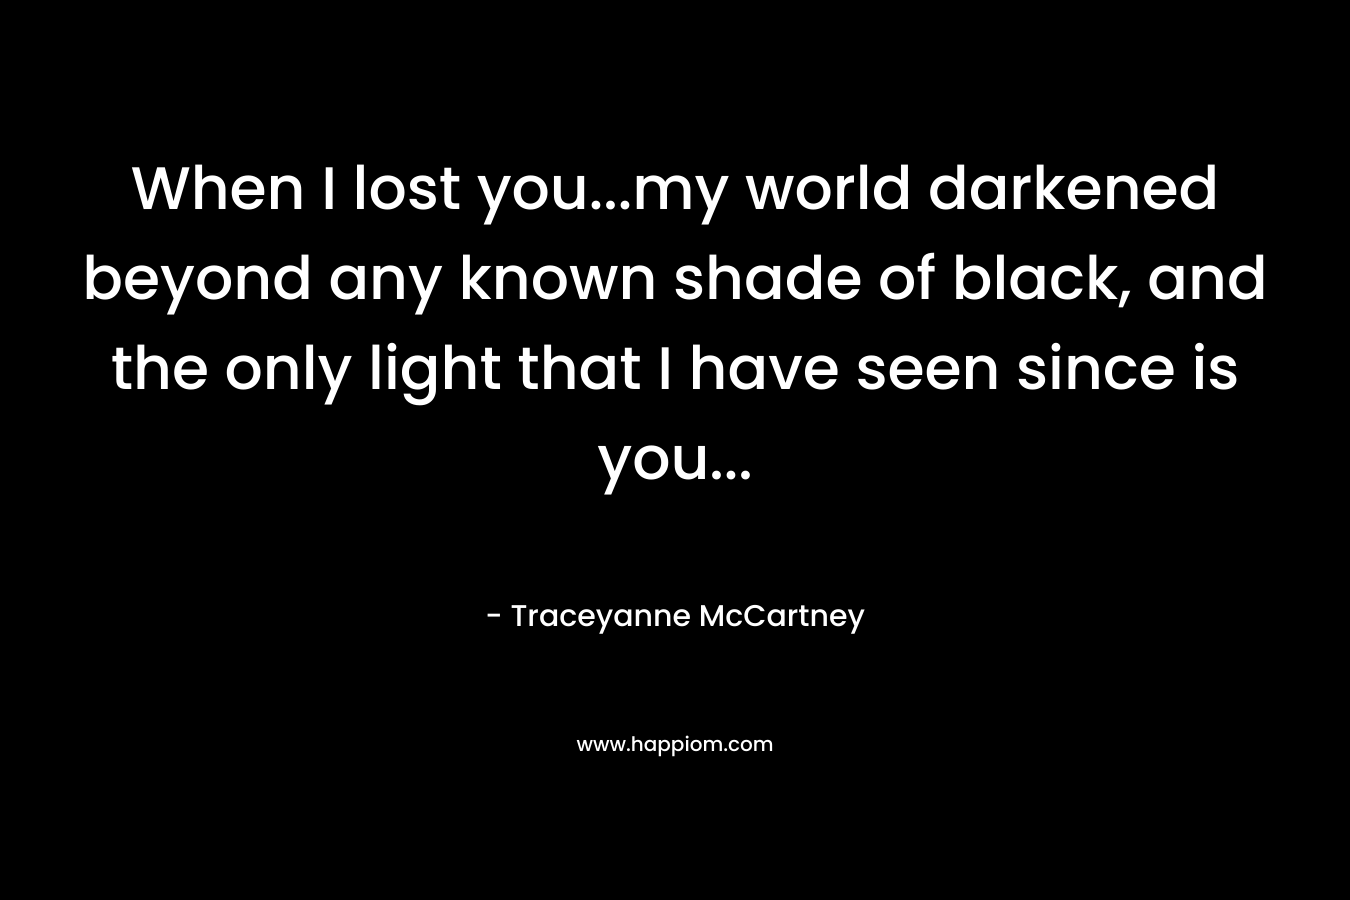 When I lost you…my world darkened beyond any known shade of black, and the only light that I have seen since is you… – Traceyanne McCartney